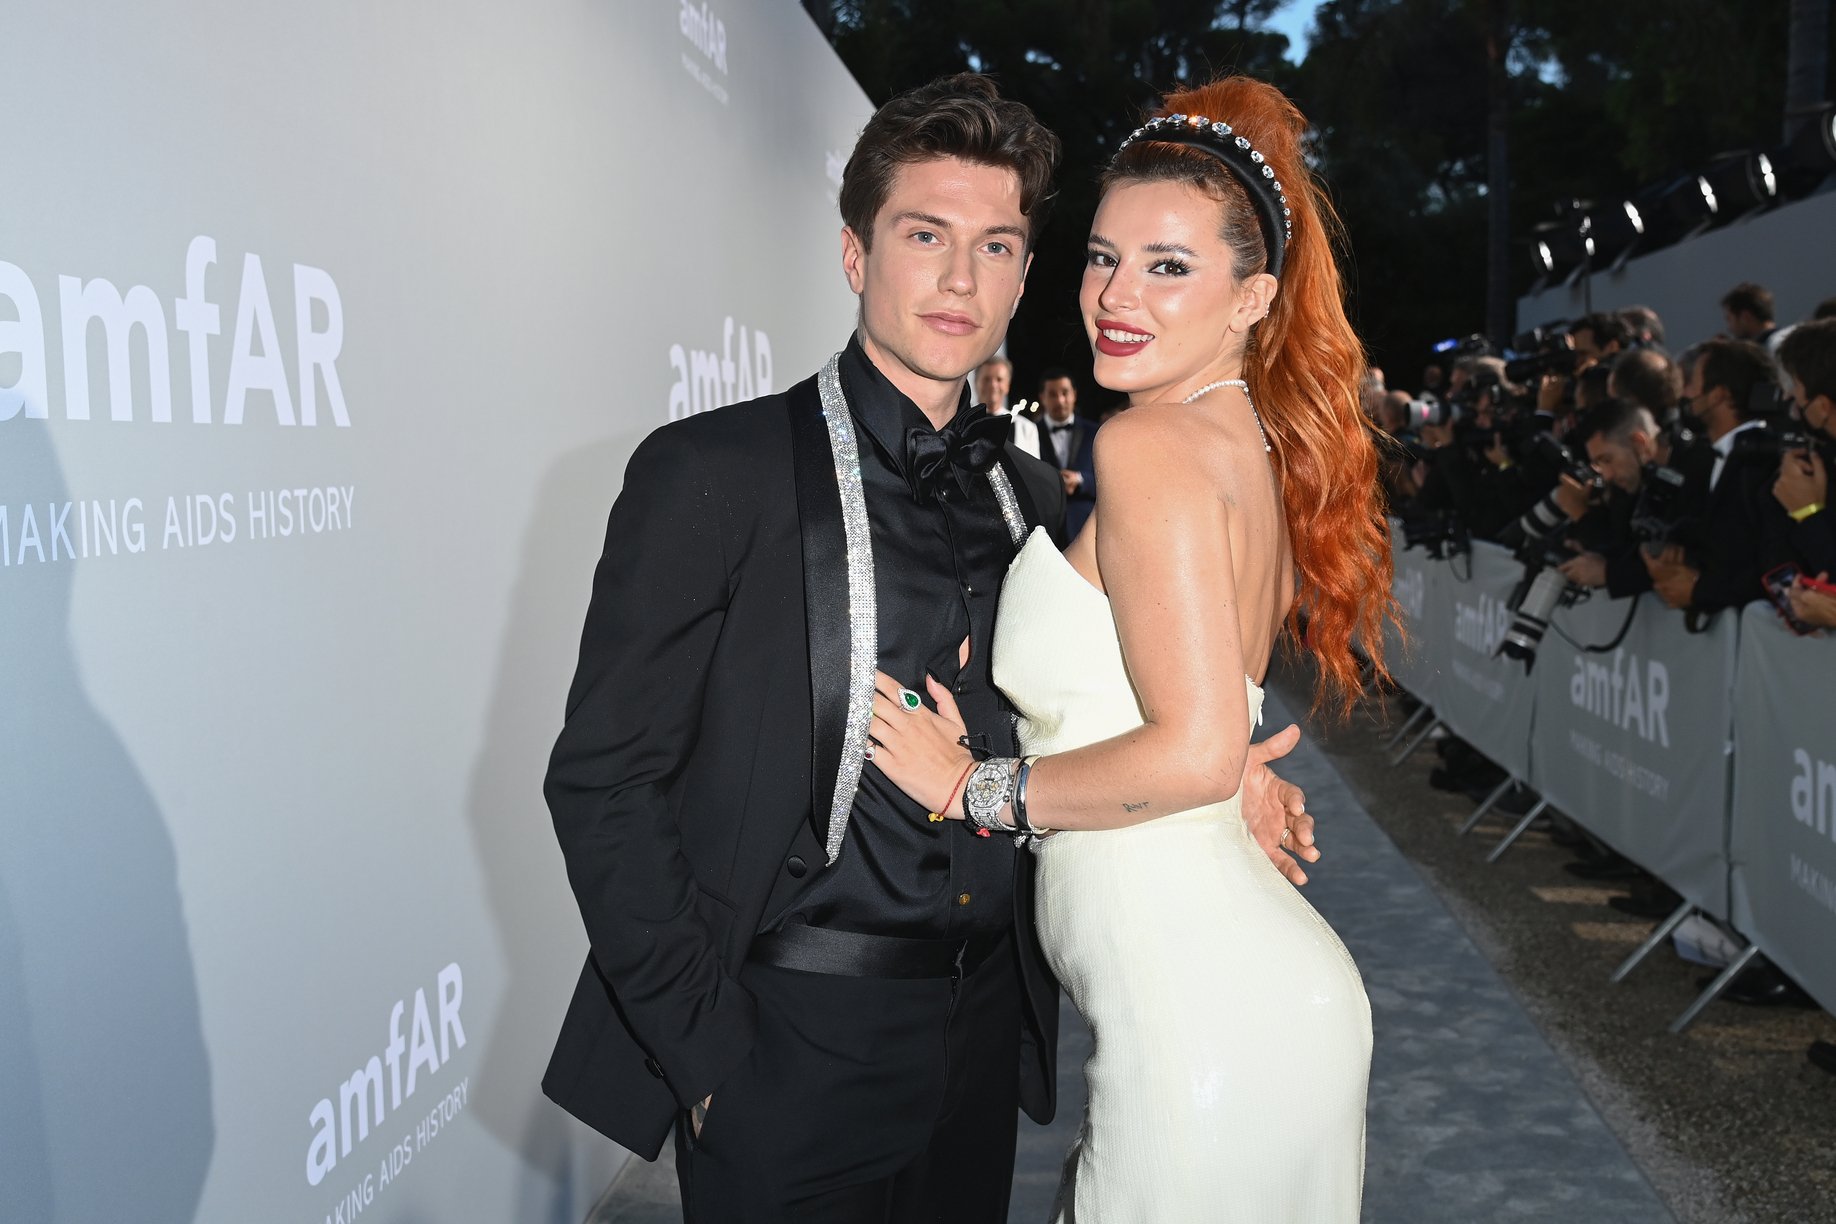 Benjamin Mascolo and Bella Thorne 'Time Is Up' waering blax suit and white dress